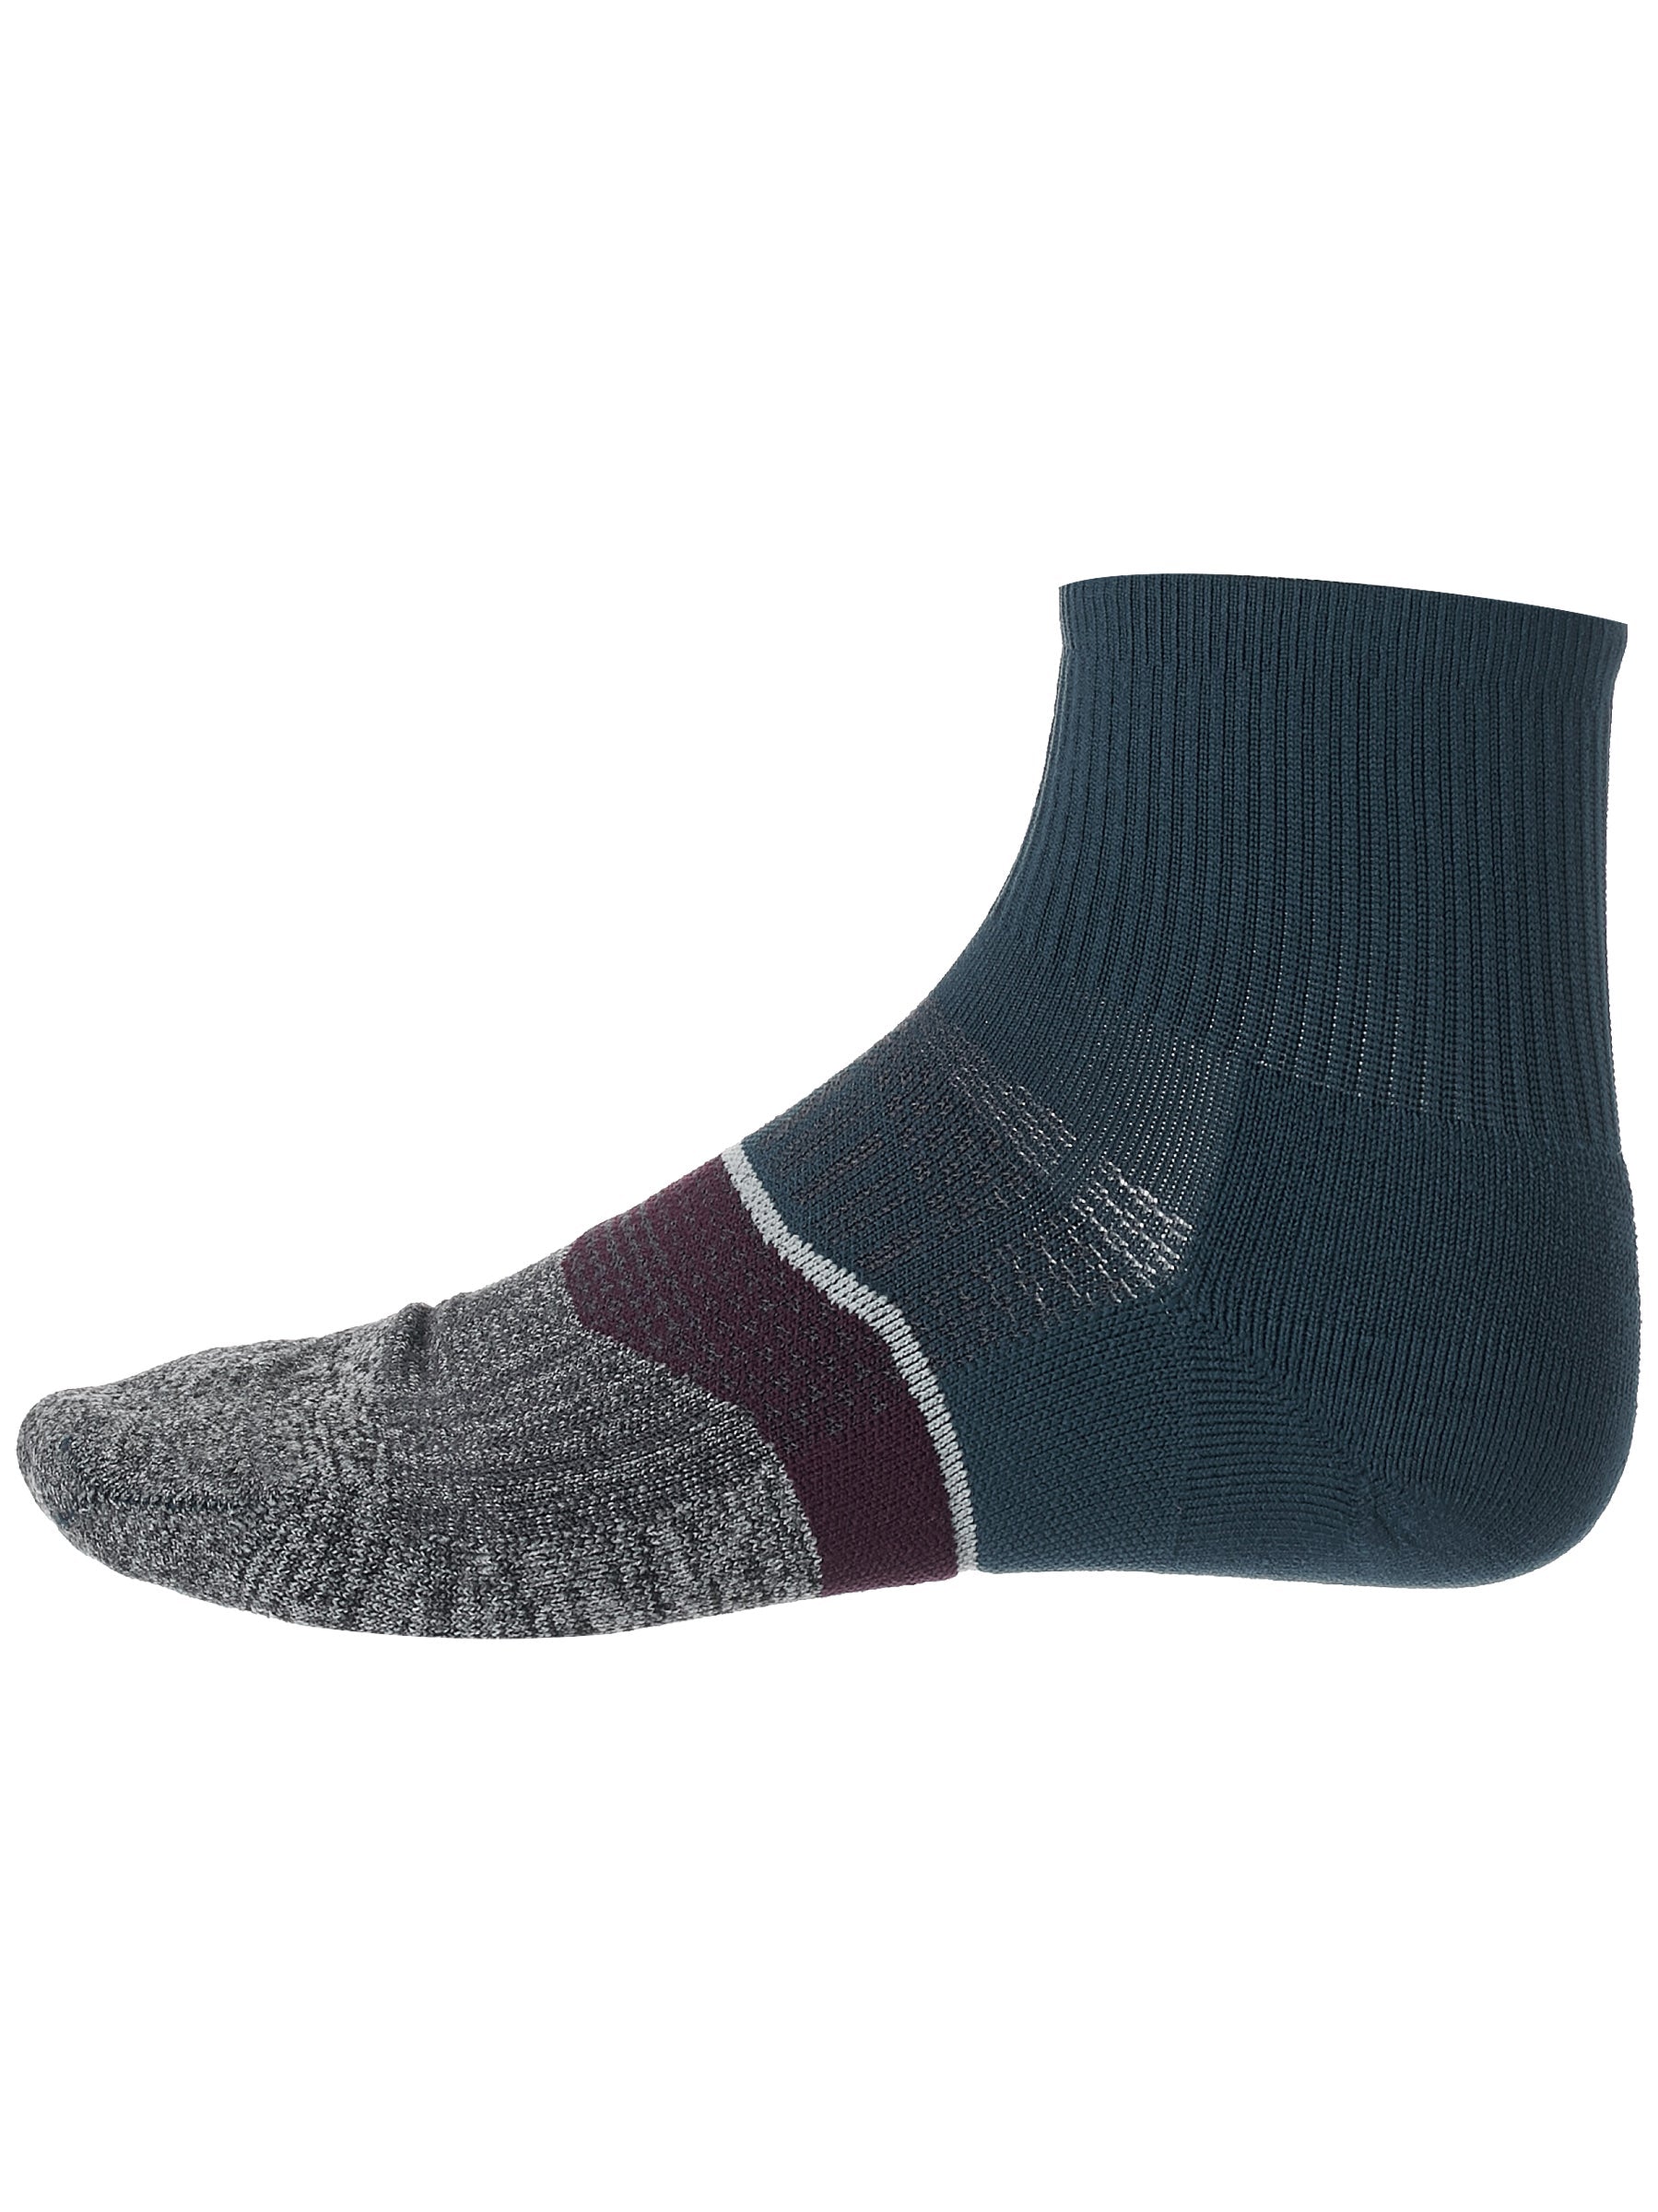 Lateral view of the Feetures Light Cushion Quarter sock in the color French blue navy